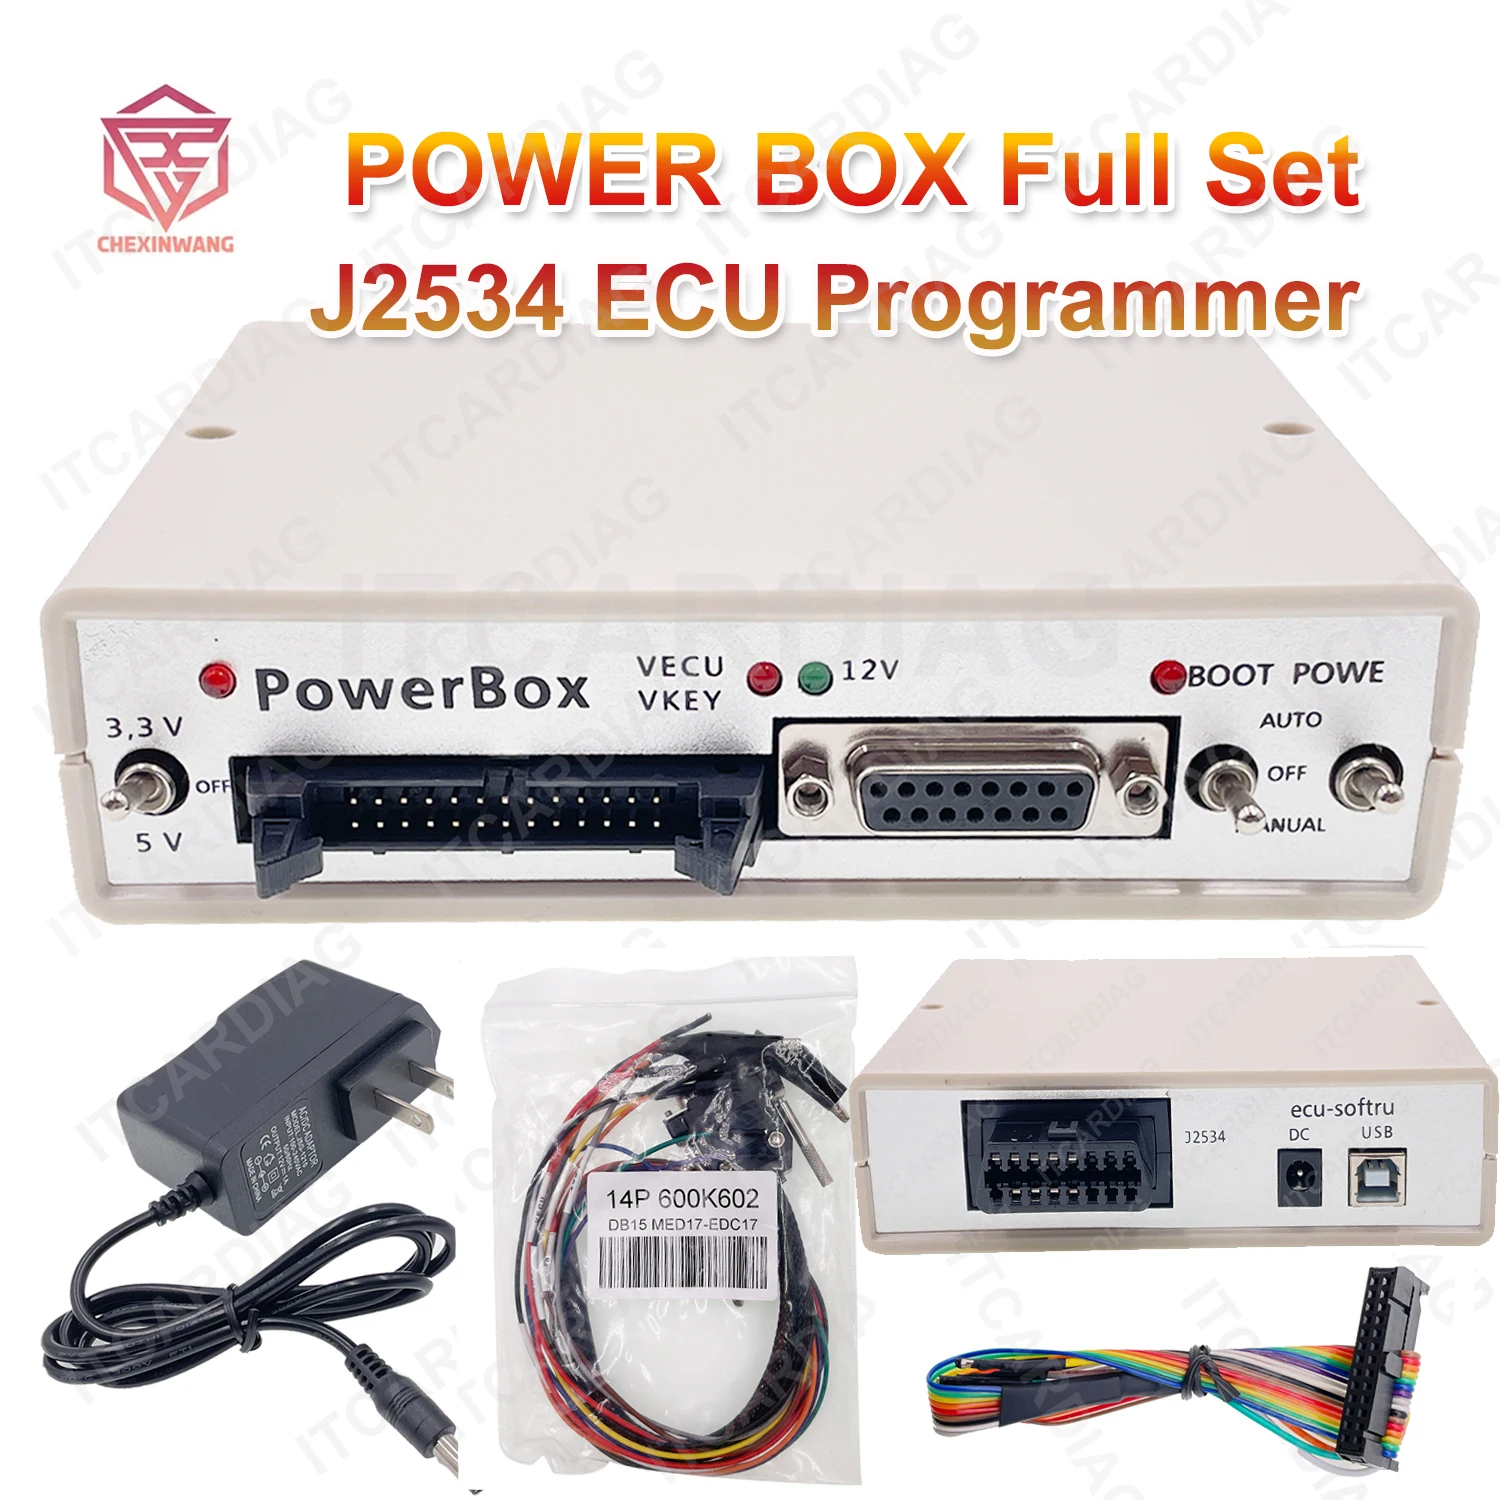 

Power Box ECU Programmer JTAG PowerBox for PCM Flash Via J2534 Work with Openport 2.0 Power Box Connectors Full Adapters